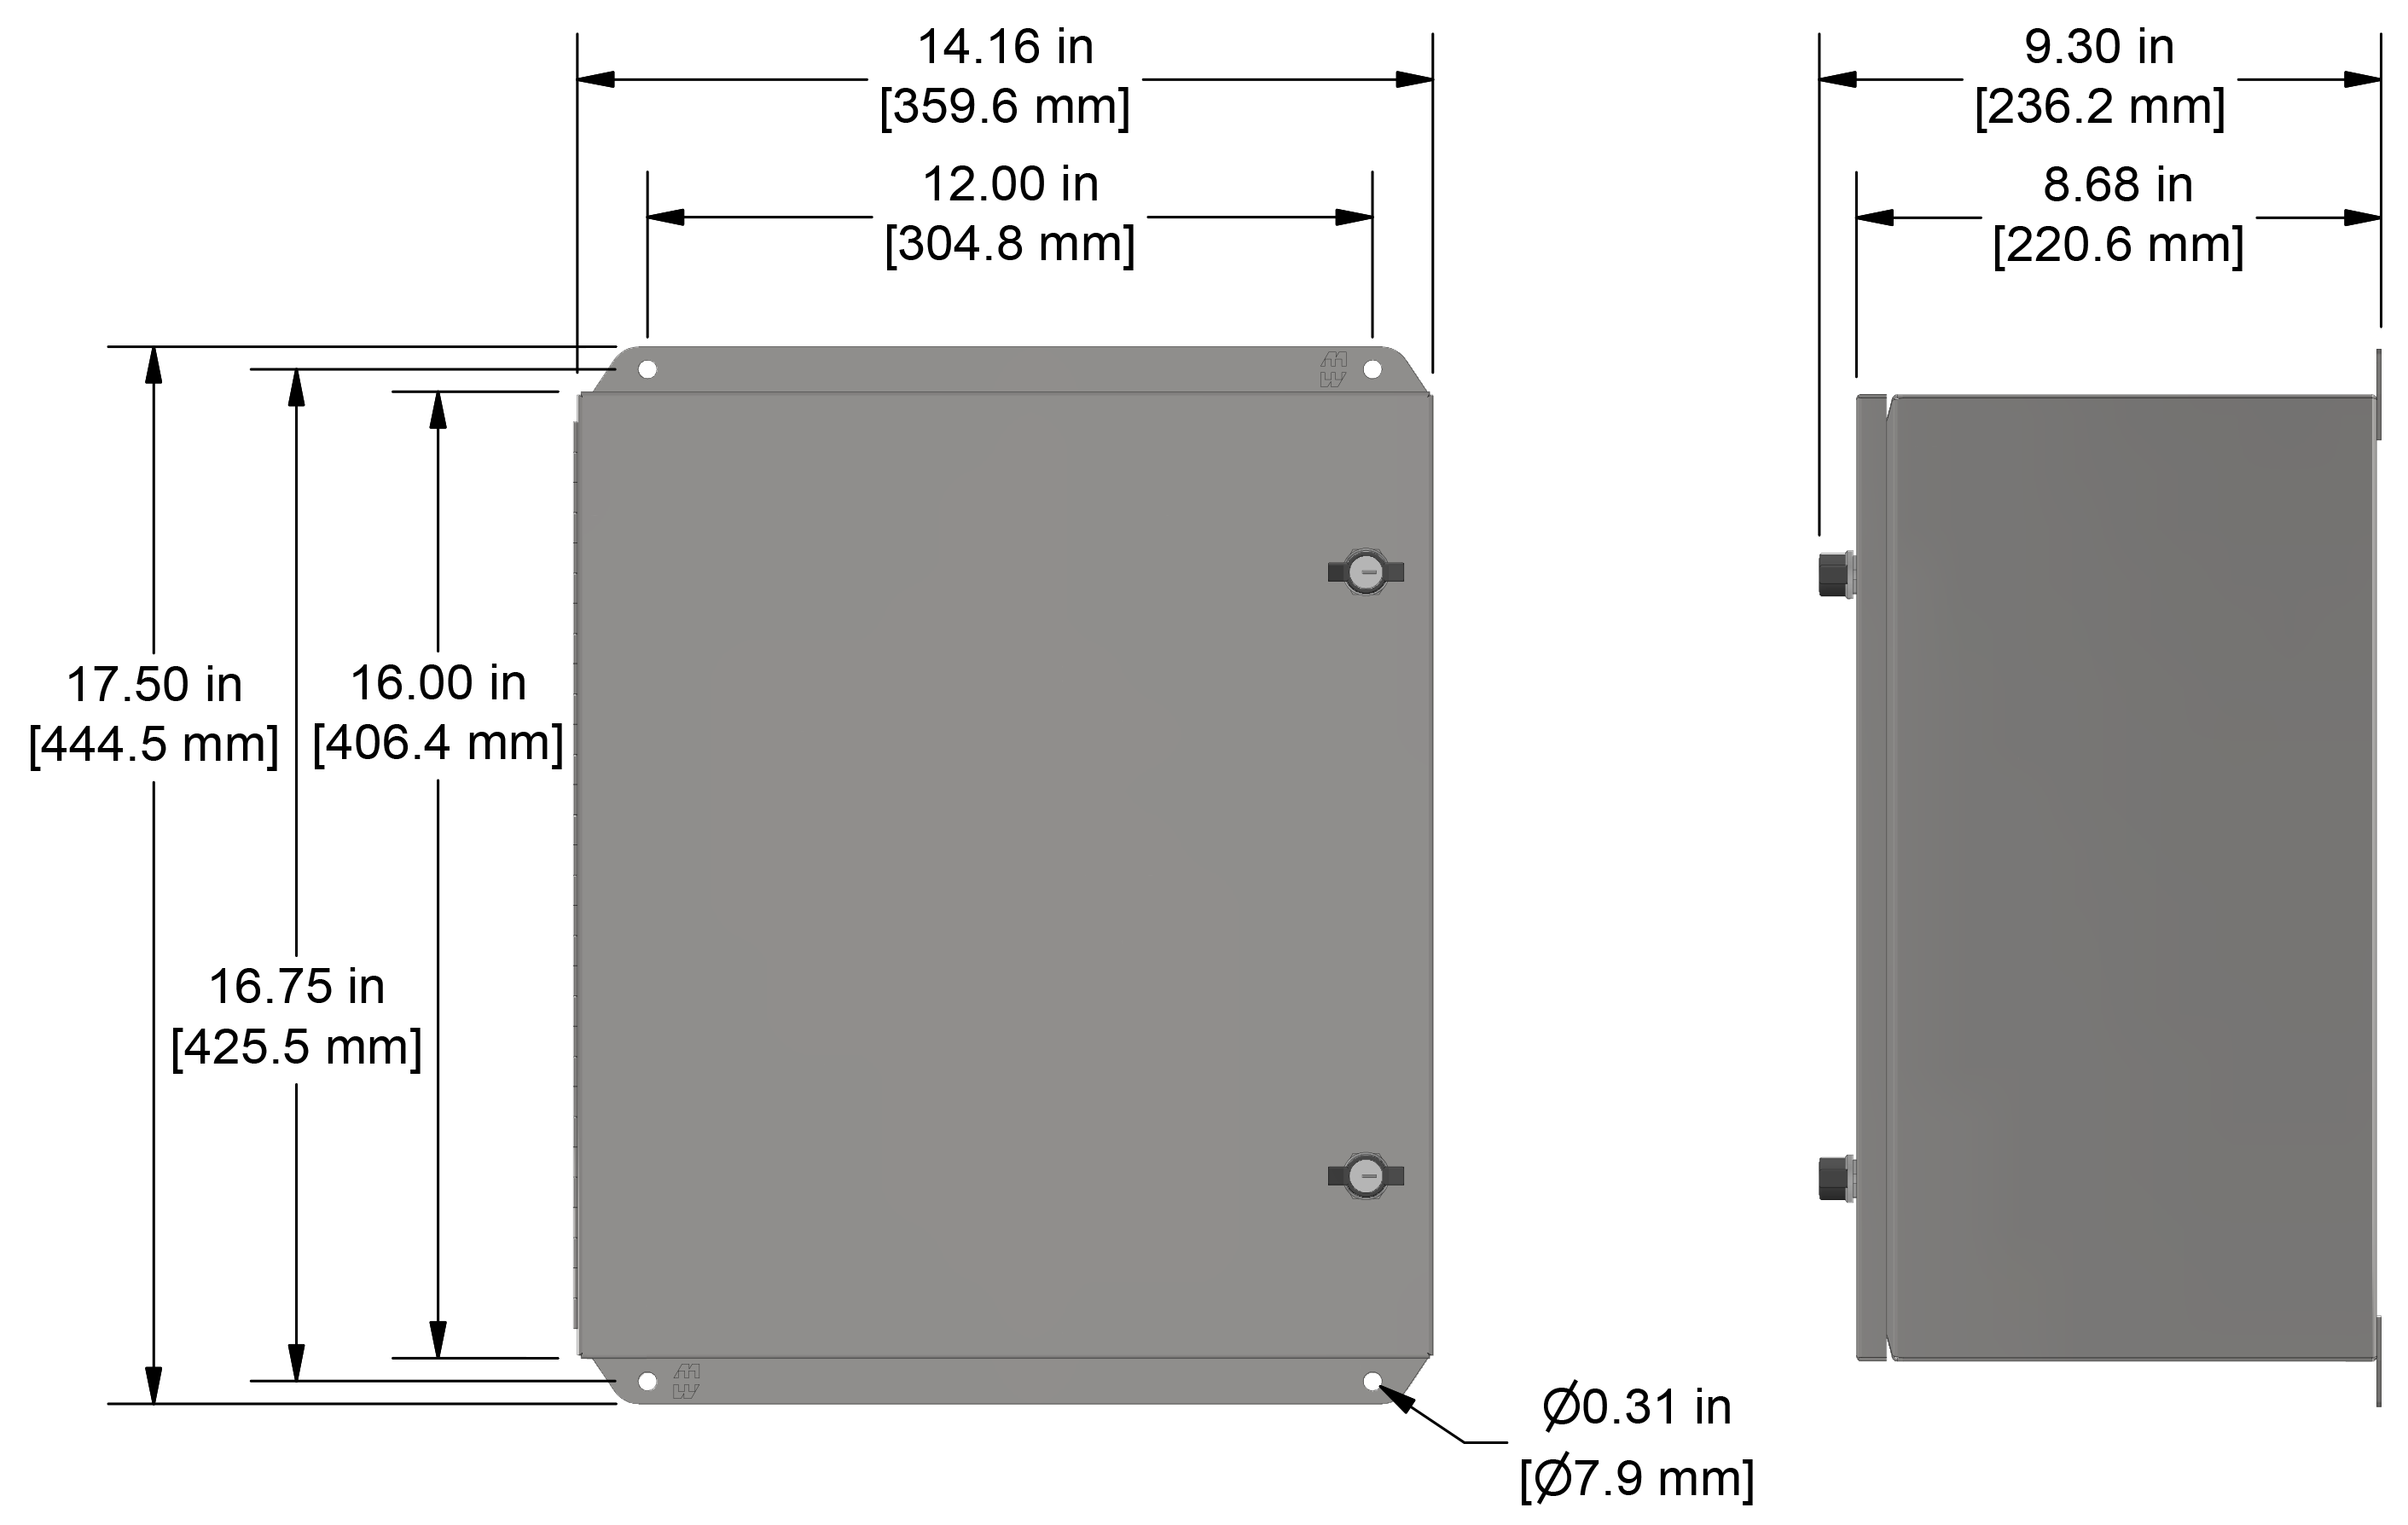 A drawing showing the dimensions of a CTC SCE410 Series industrial enclosure.